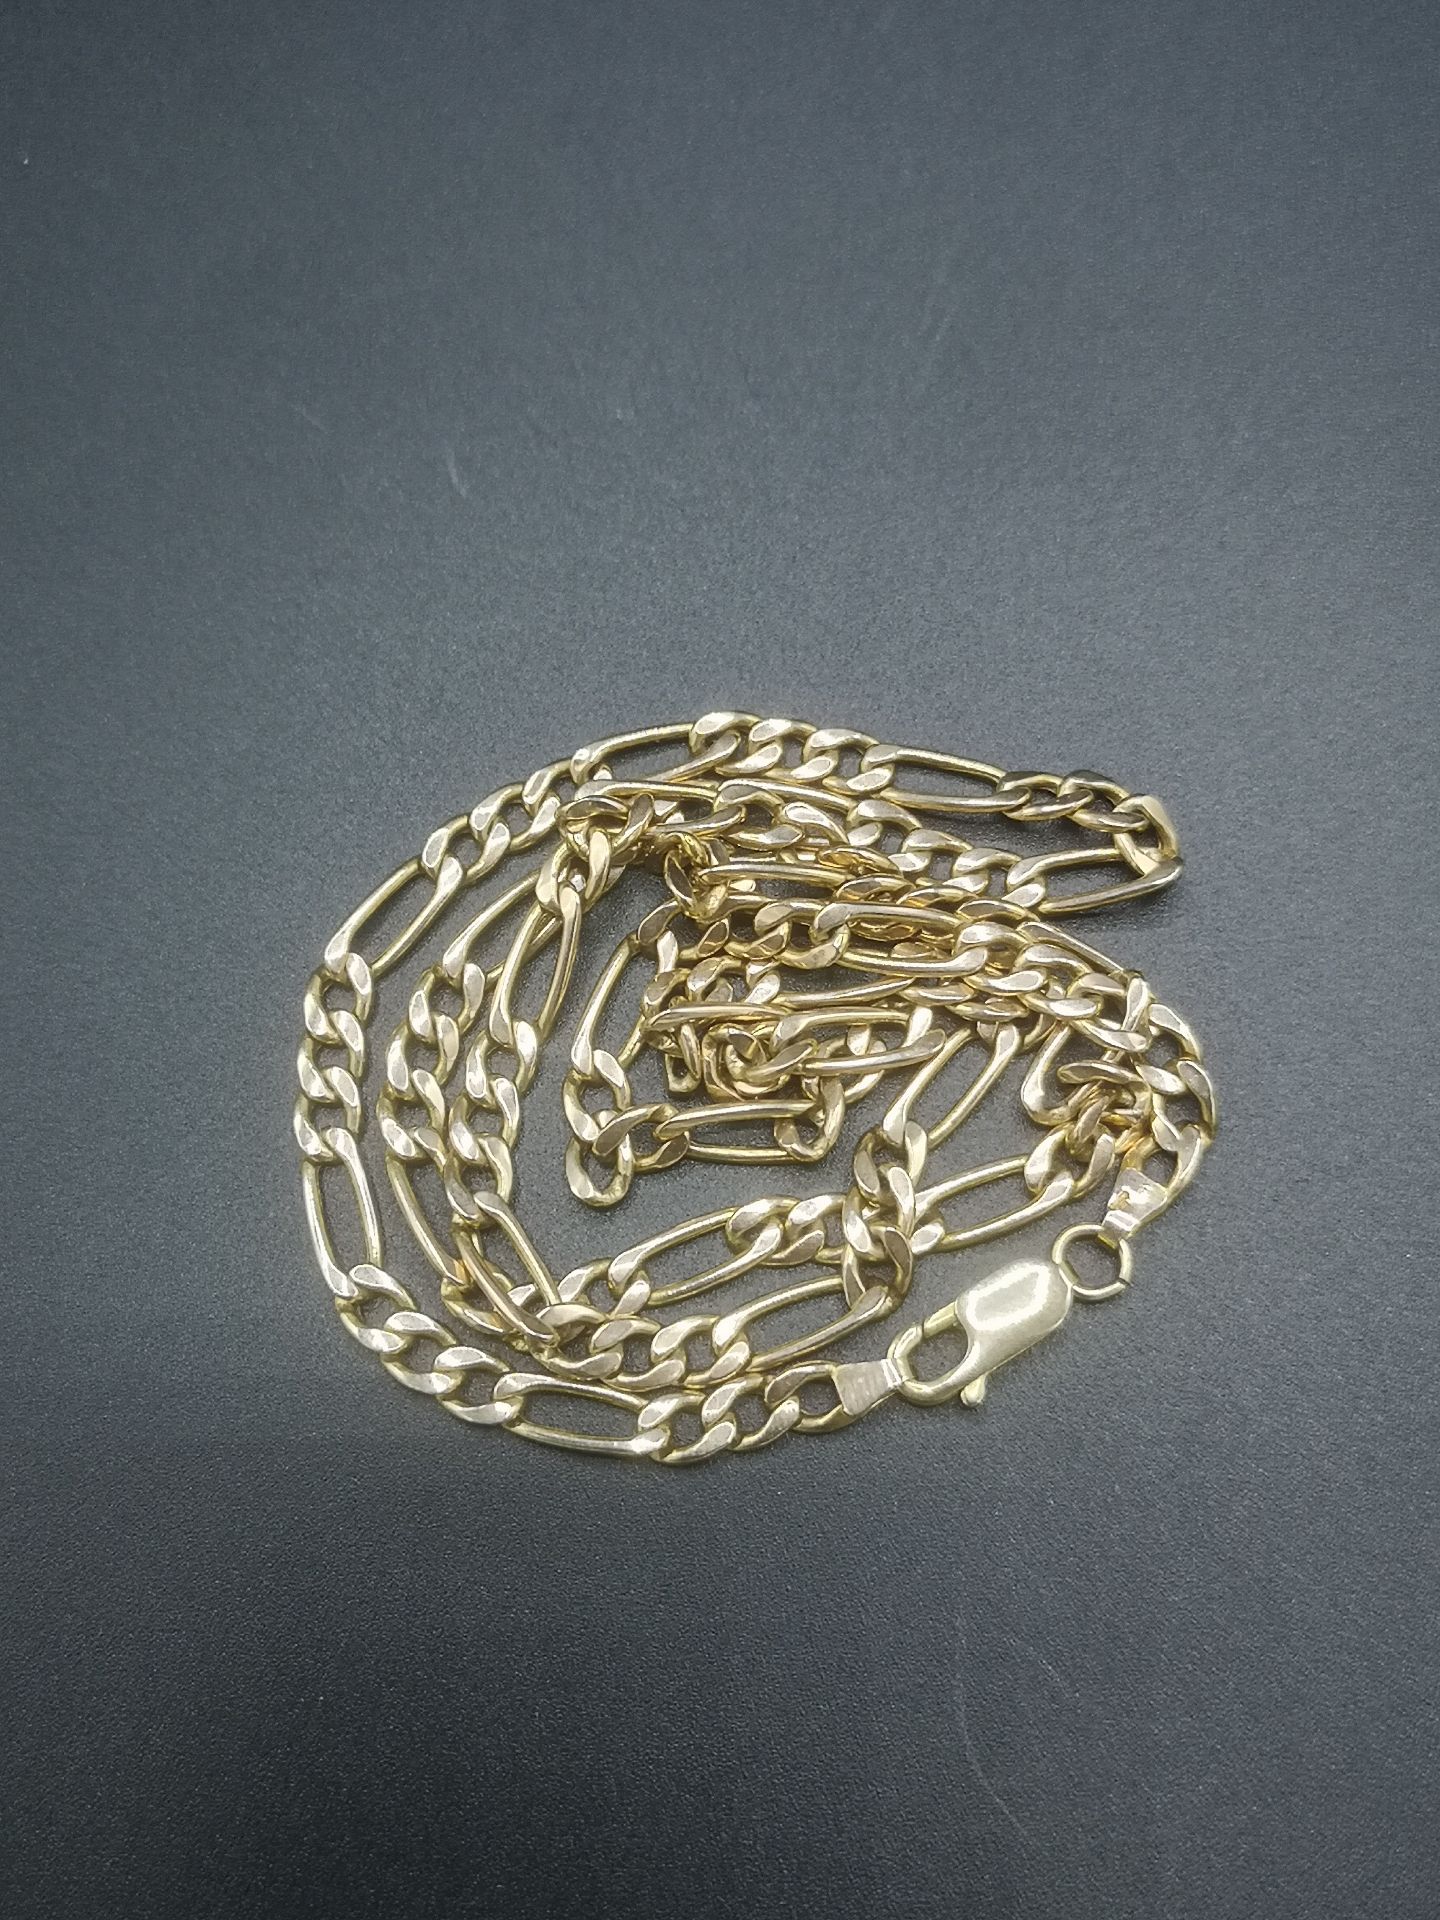 9ct gold necklace - Image 6 of 6